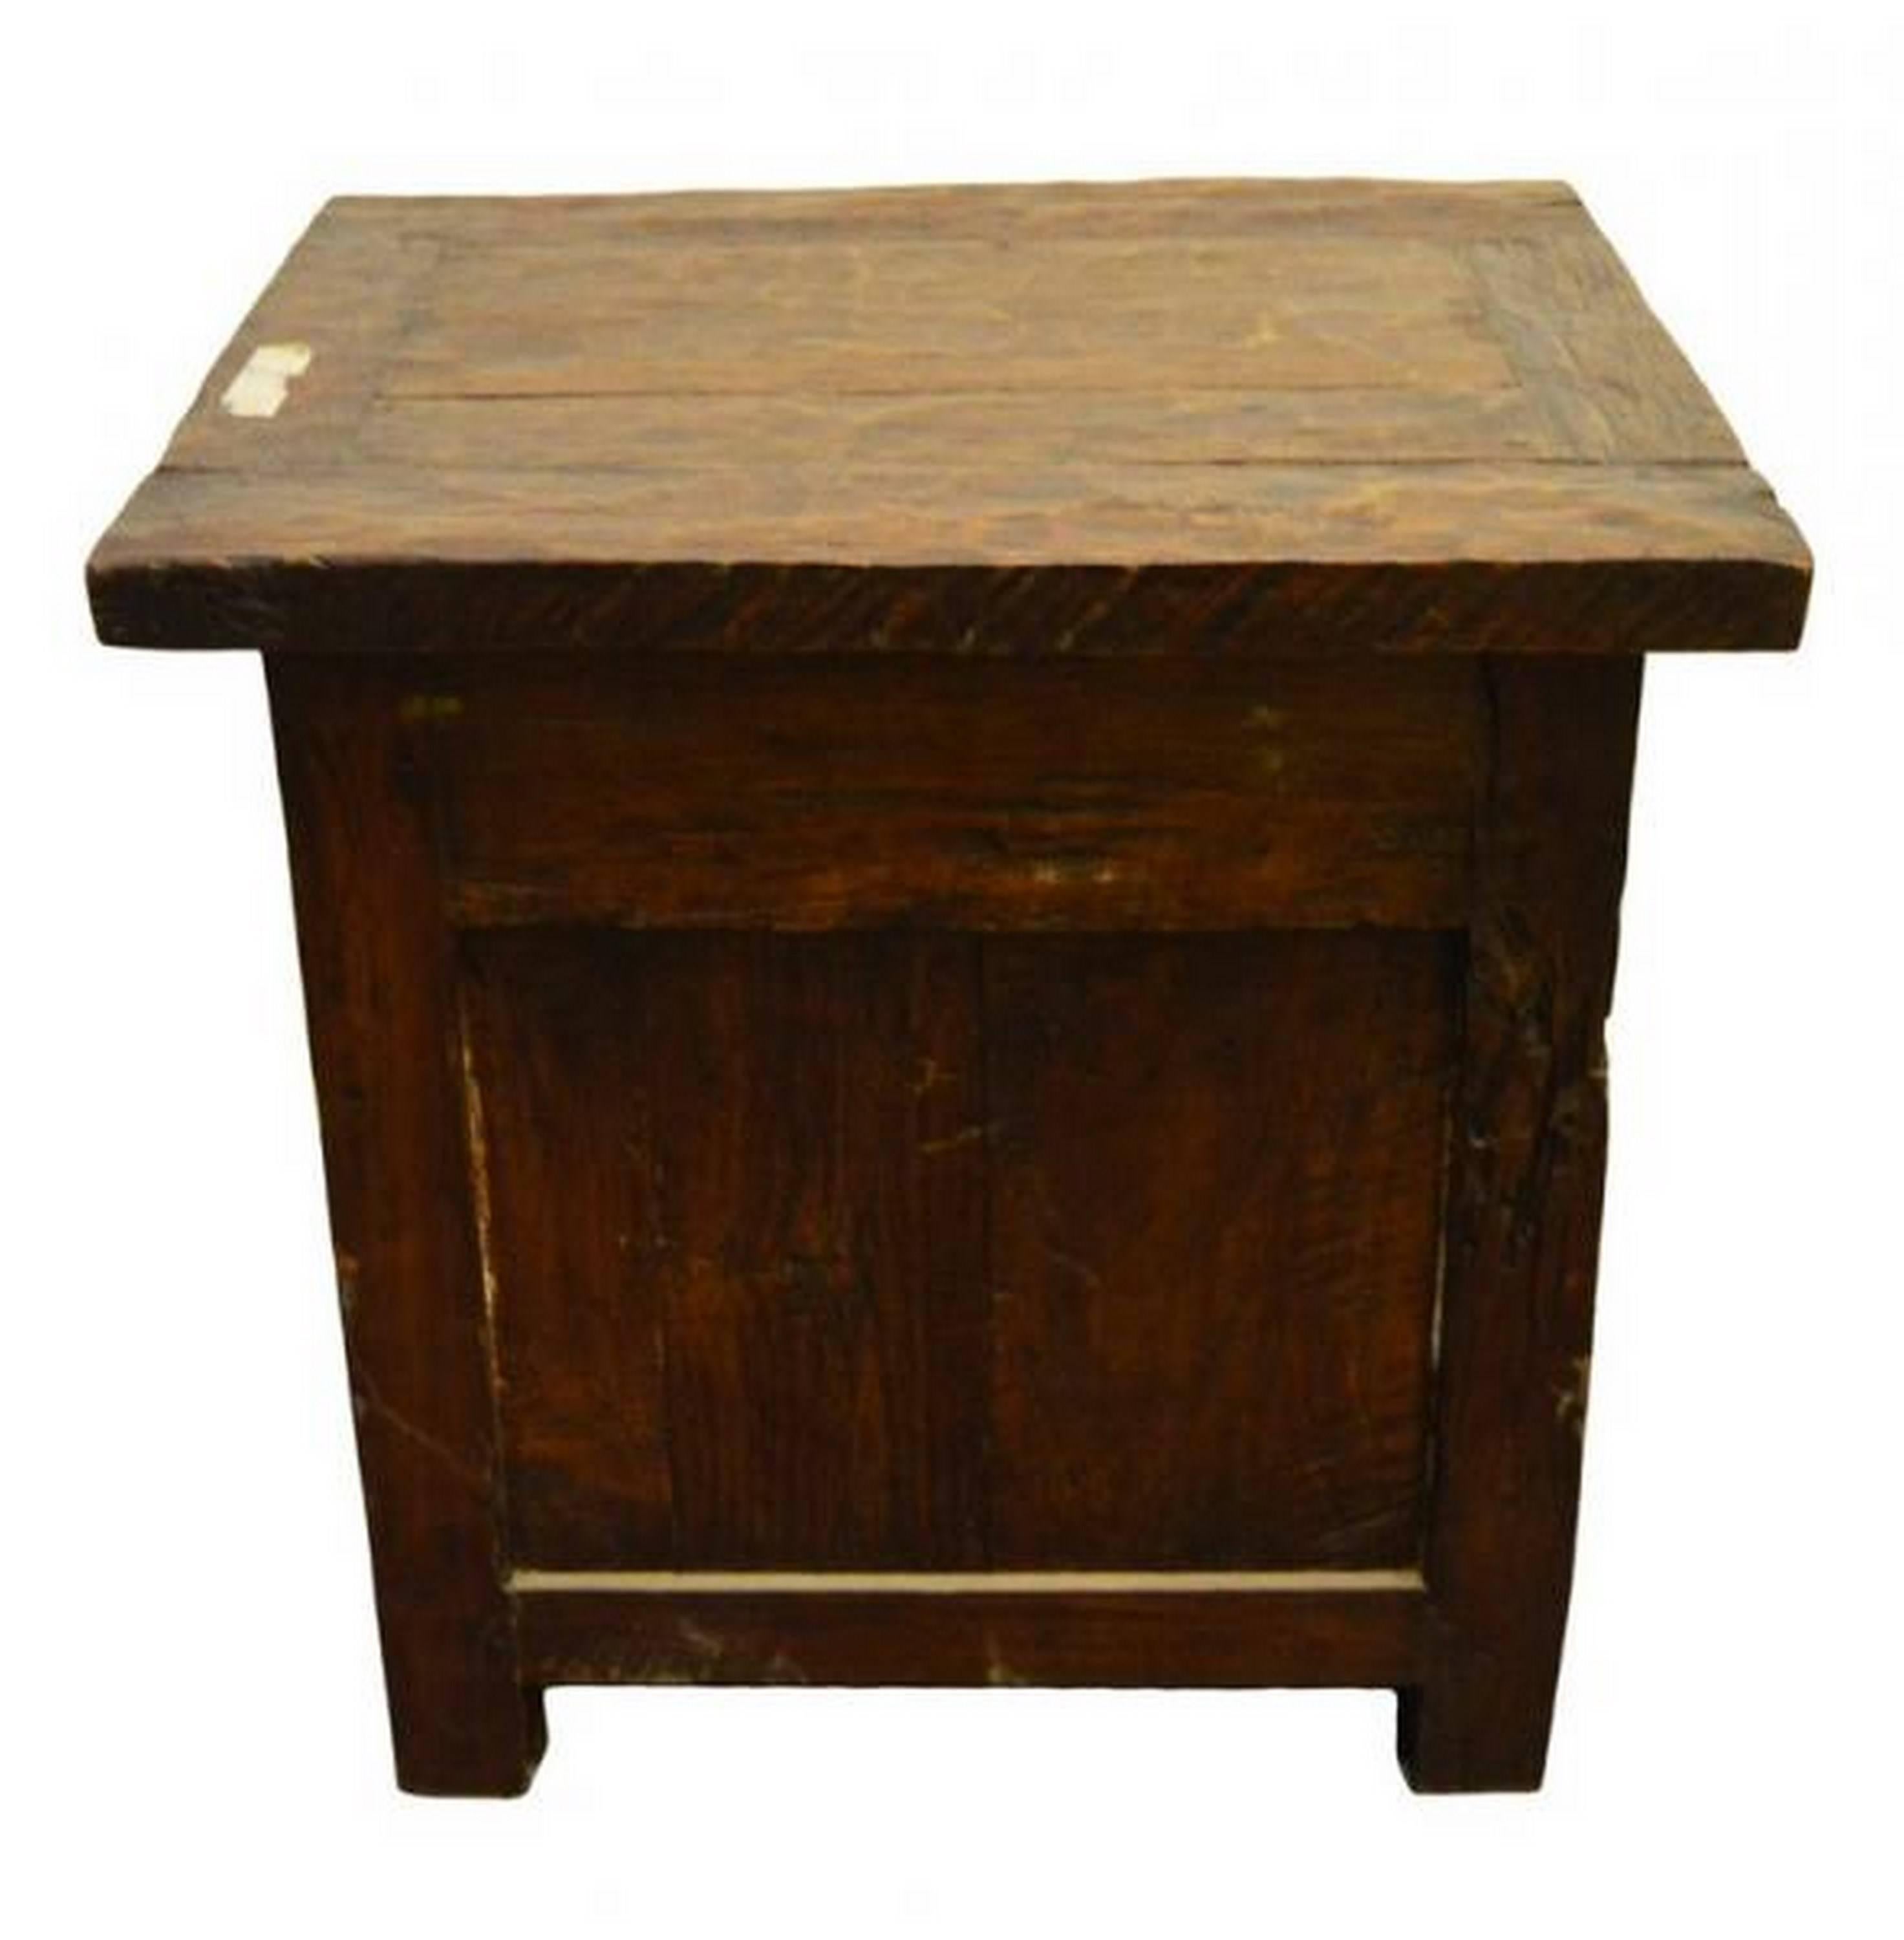 Varnished Antique 19th Century Javanese Rustic Bedside Table with Drawer and Storage 